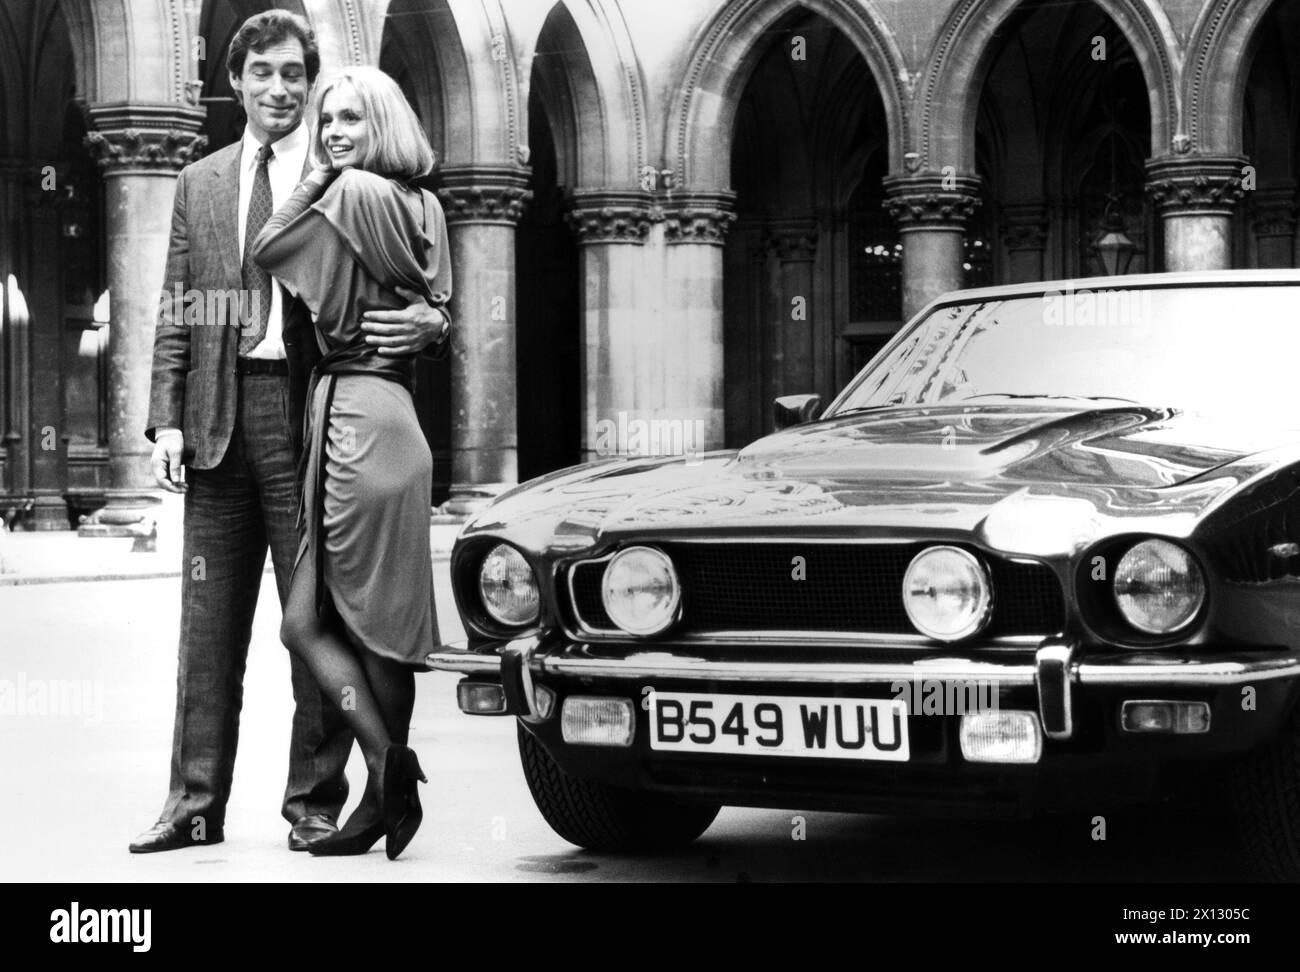 Vienna, on October 5th 1986: A new 'James Bond' naturally needs a new luxurious car. Picture: Timothy Dalton (007) with actress Maryam d'Abo beside this special purpose vehicle, an Aston Martin 'V8' Volante Coupe, in the court of the townhall of Vienna, Austria. - 19861005 PD0005 - Rechteinfo: Rights Managed (RM) Stock Photo